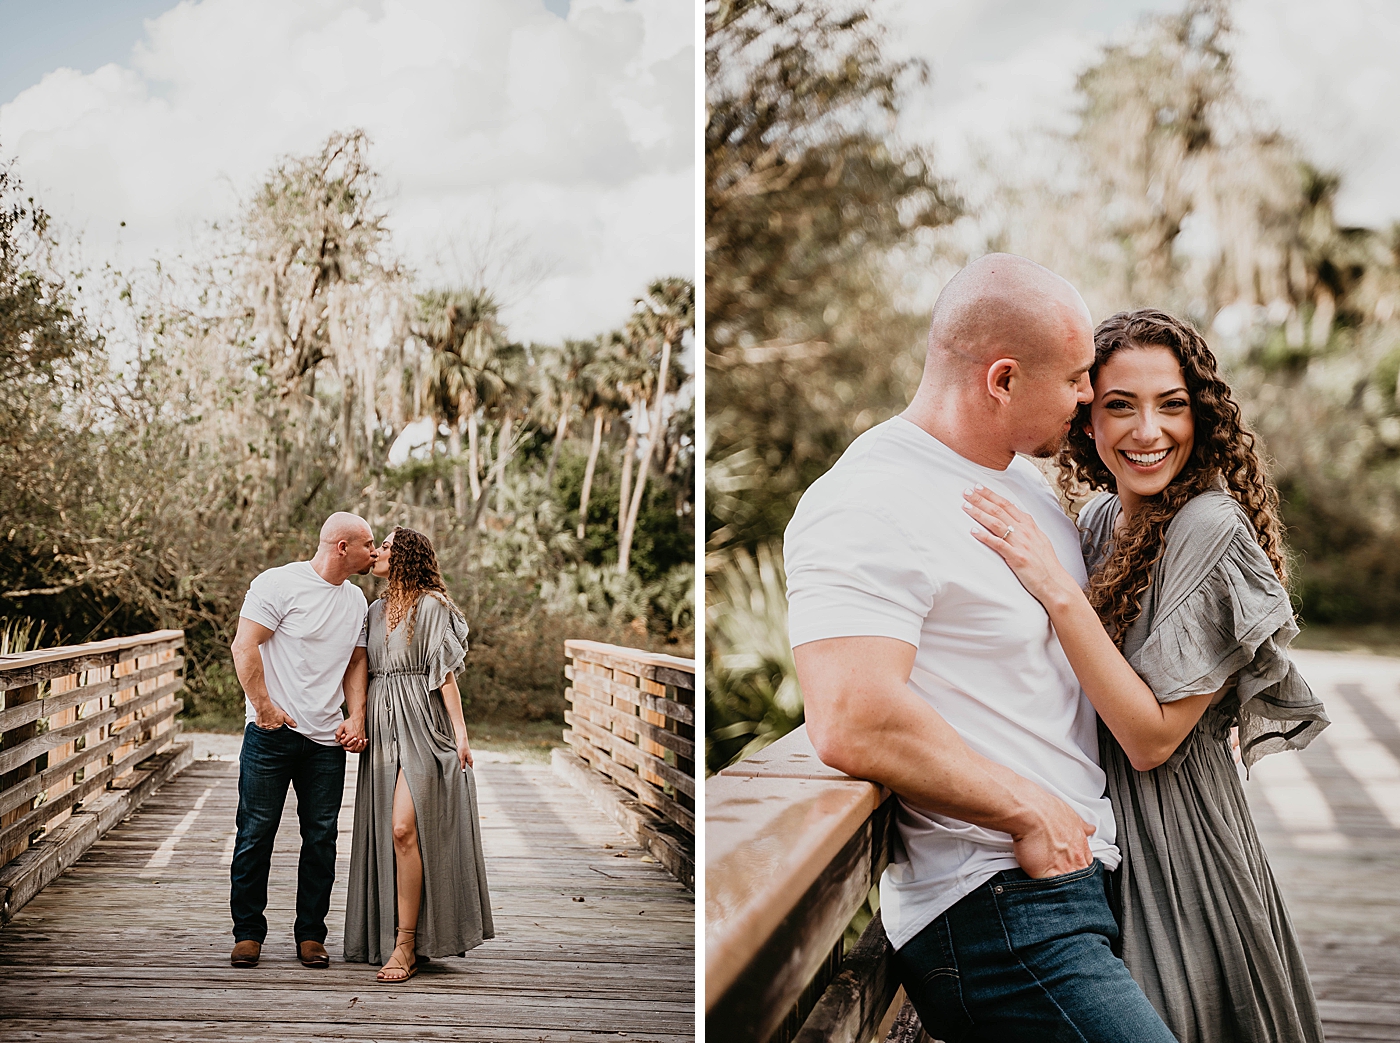 Couple kissing on wood Bridge Romantic Riverbend Park Engagement Photography captured by South Florida Photographer Krystal Capone Photography